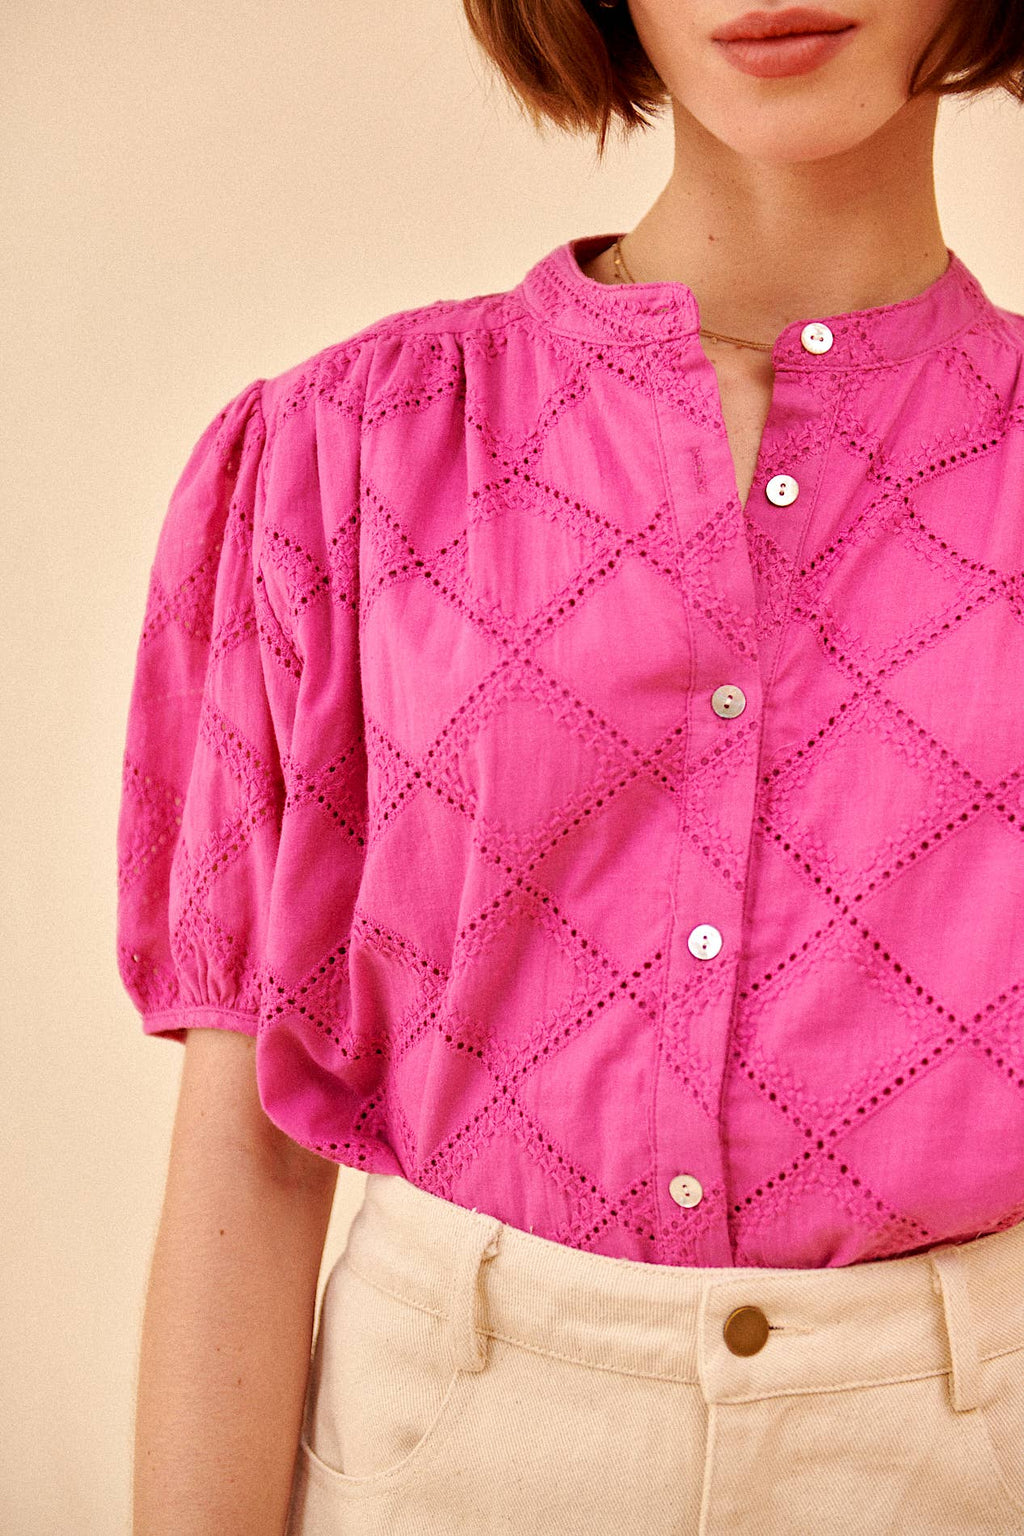 NESSIE embroidery blouse